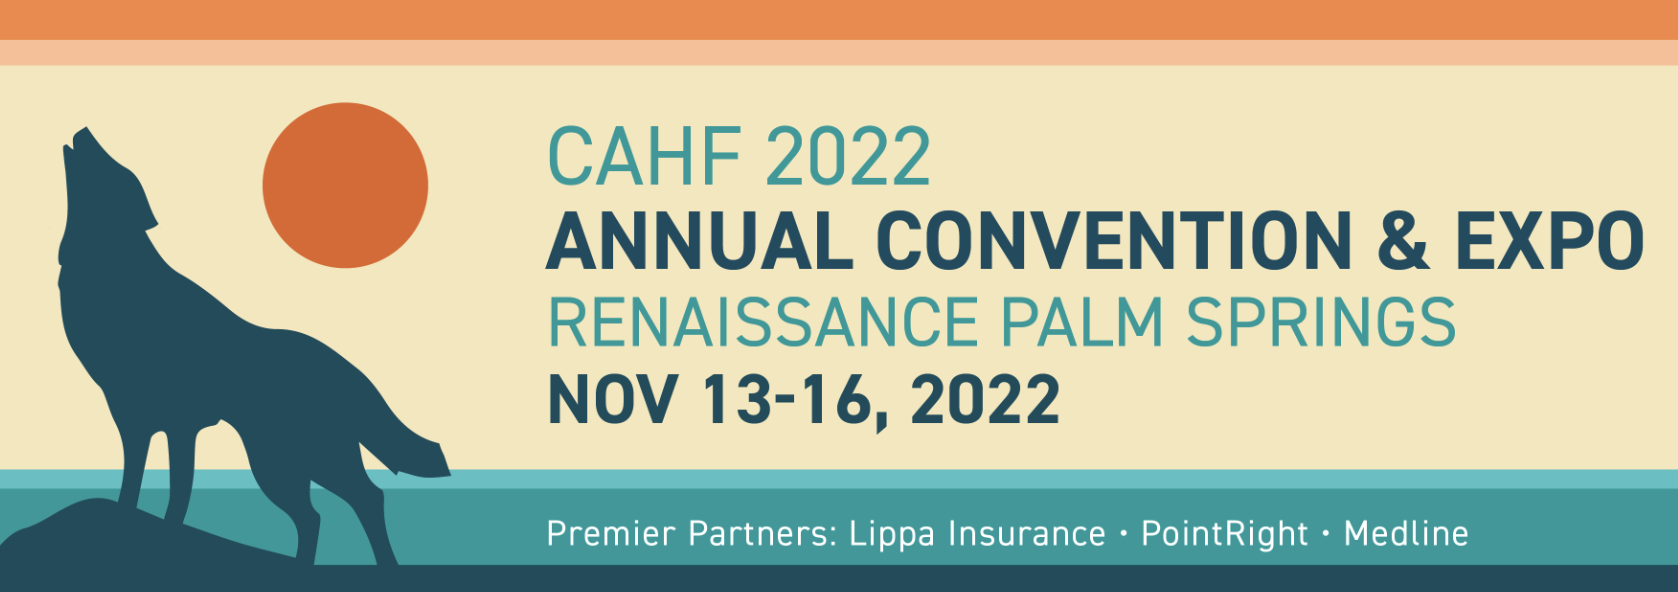 cahf-2022-annual-convention-expo